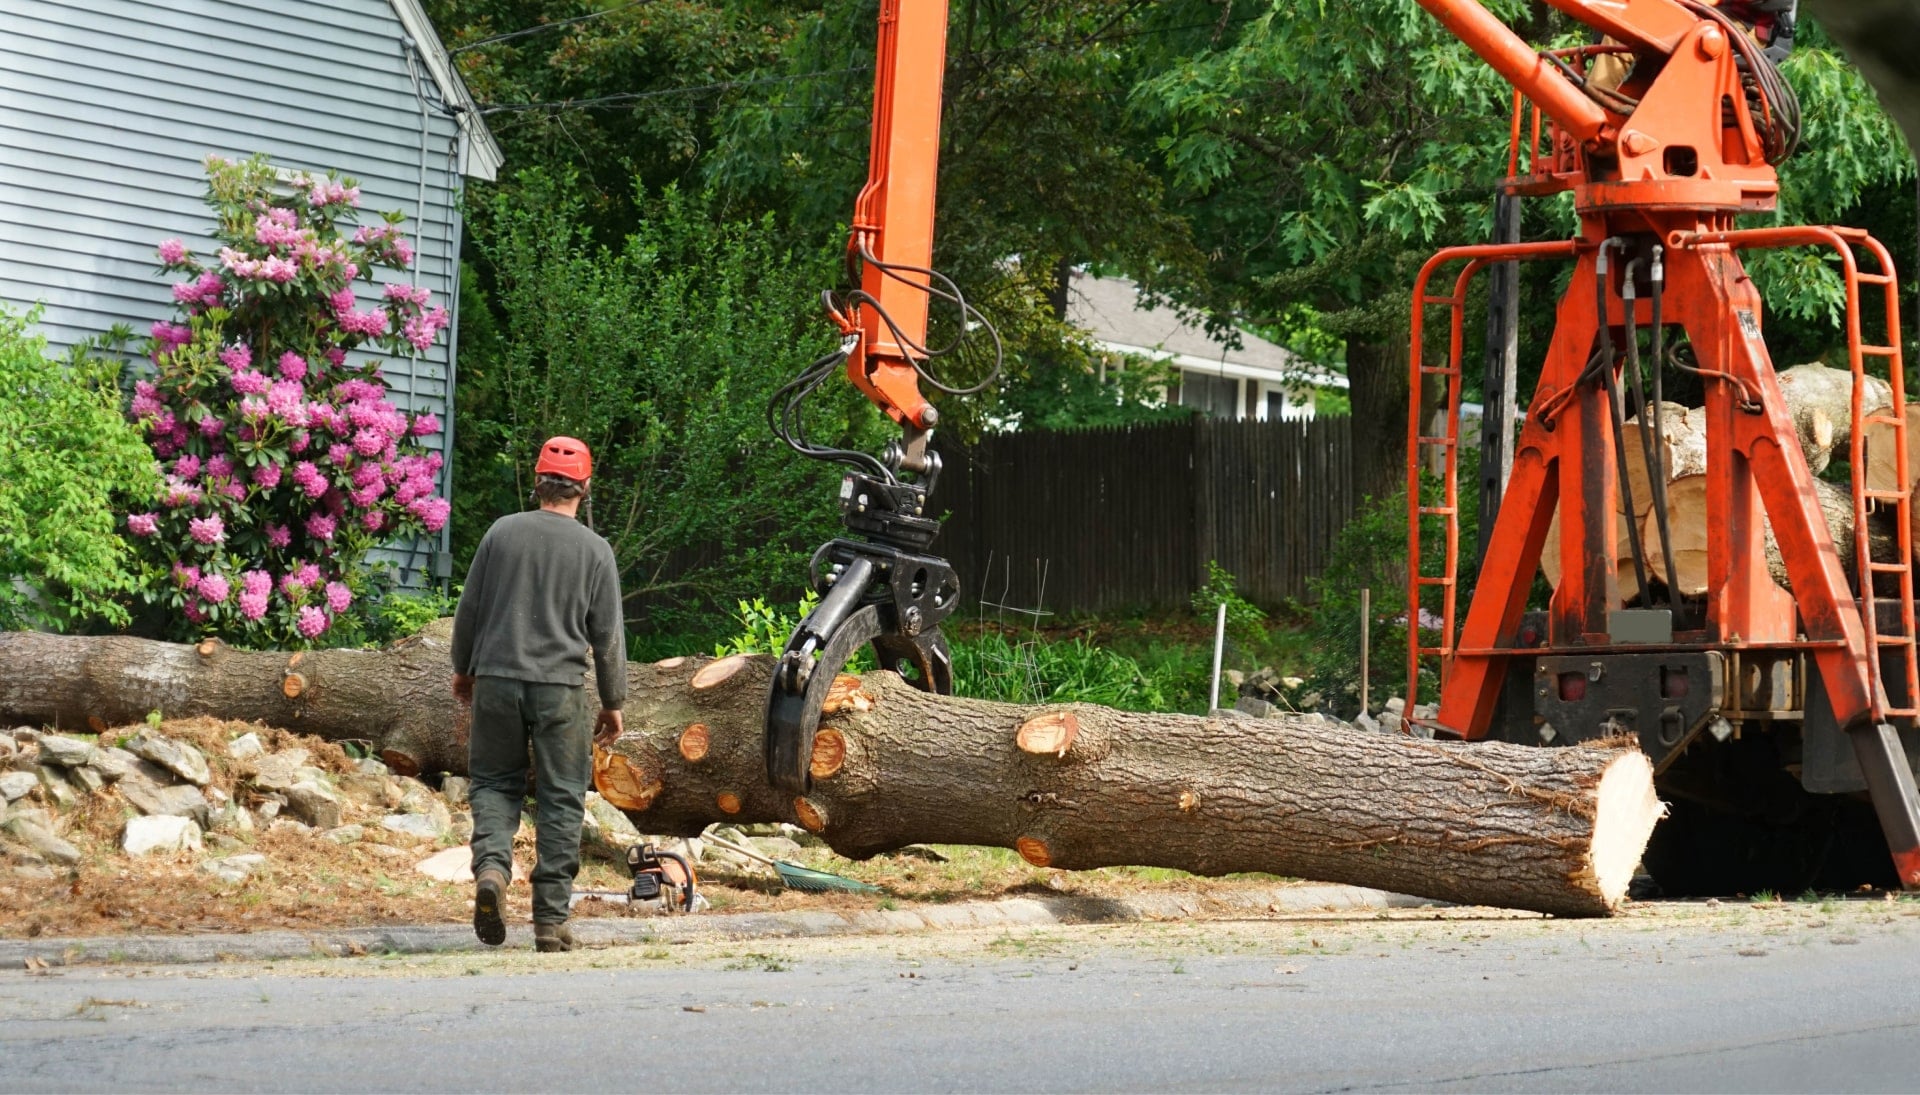 Local partner for Tree removal services in Joplin